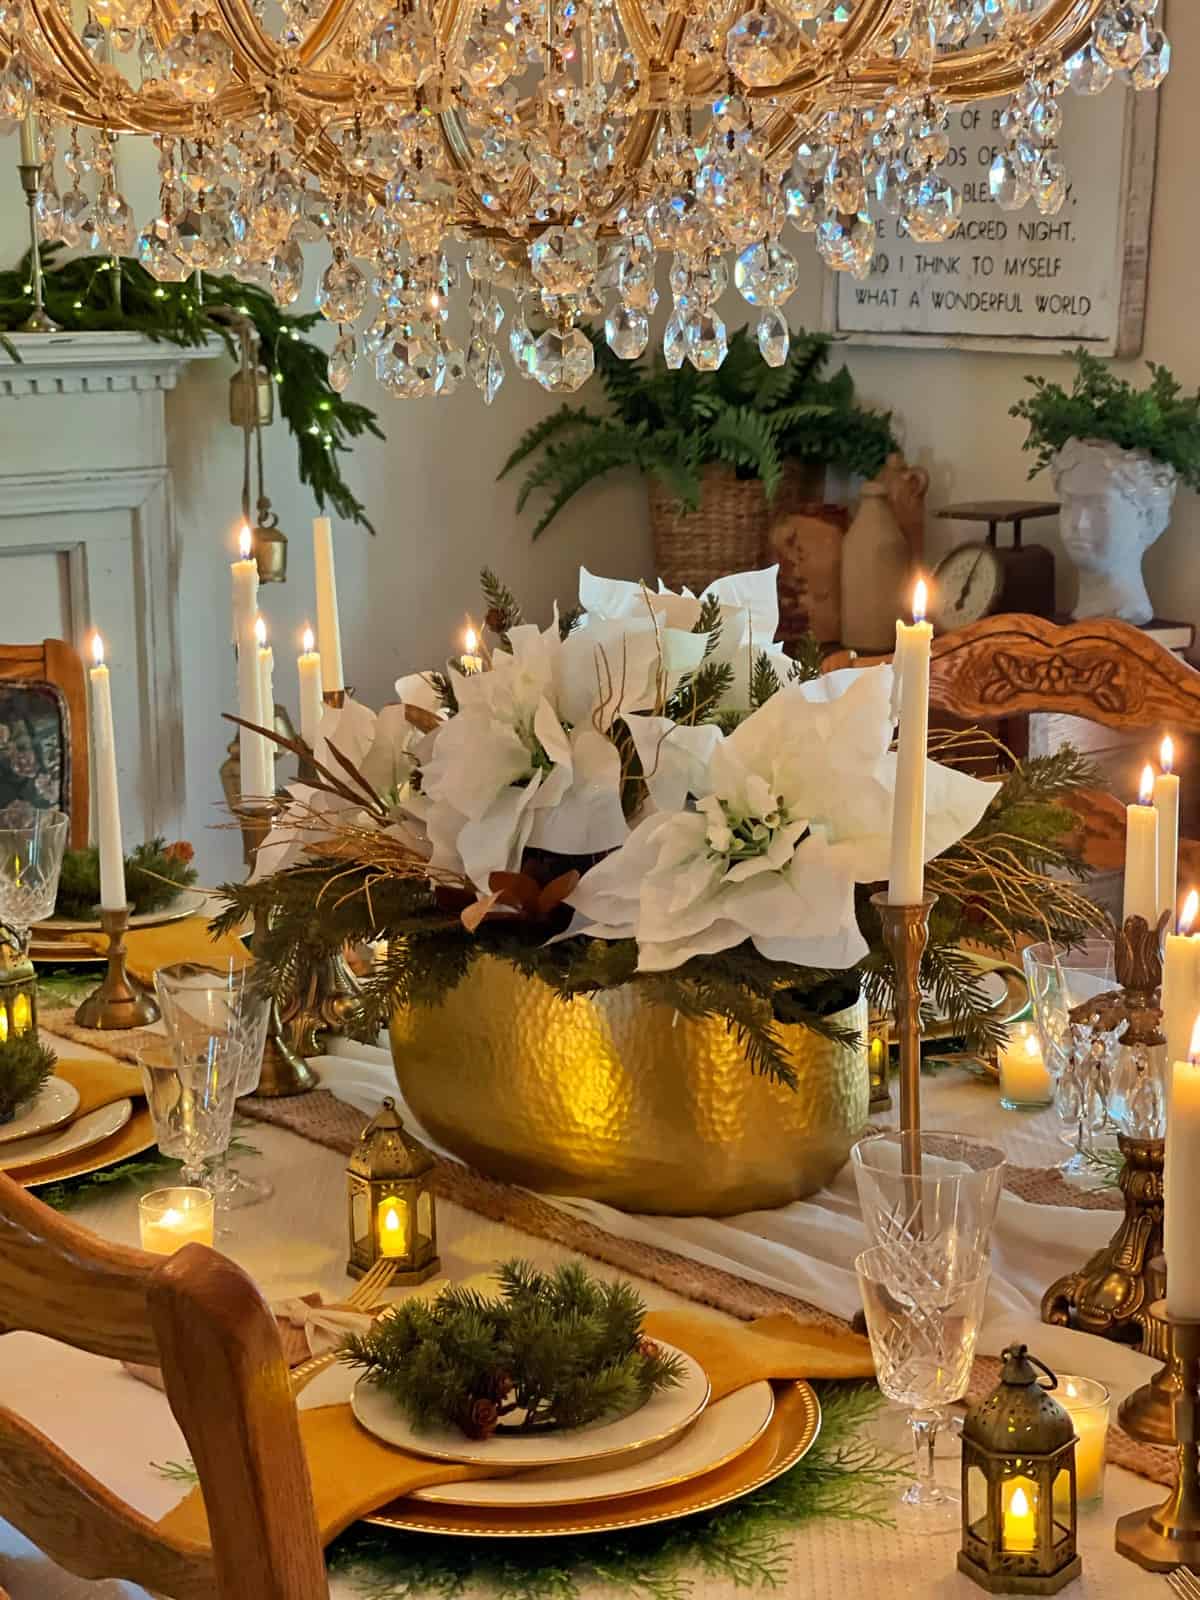 Let the Centerpiece Grab the Attention